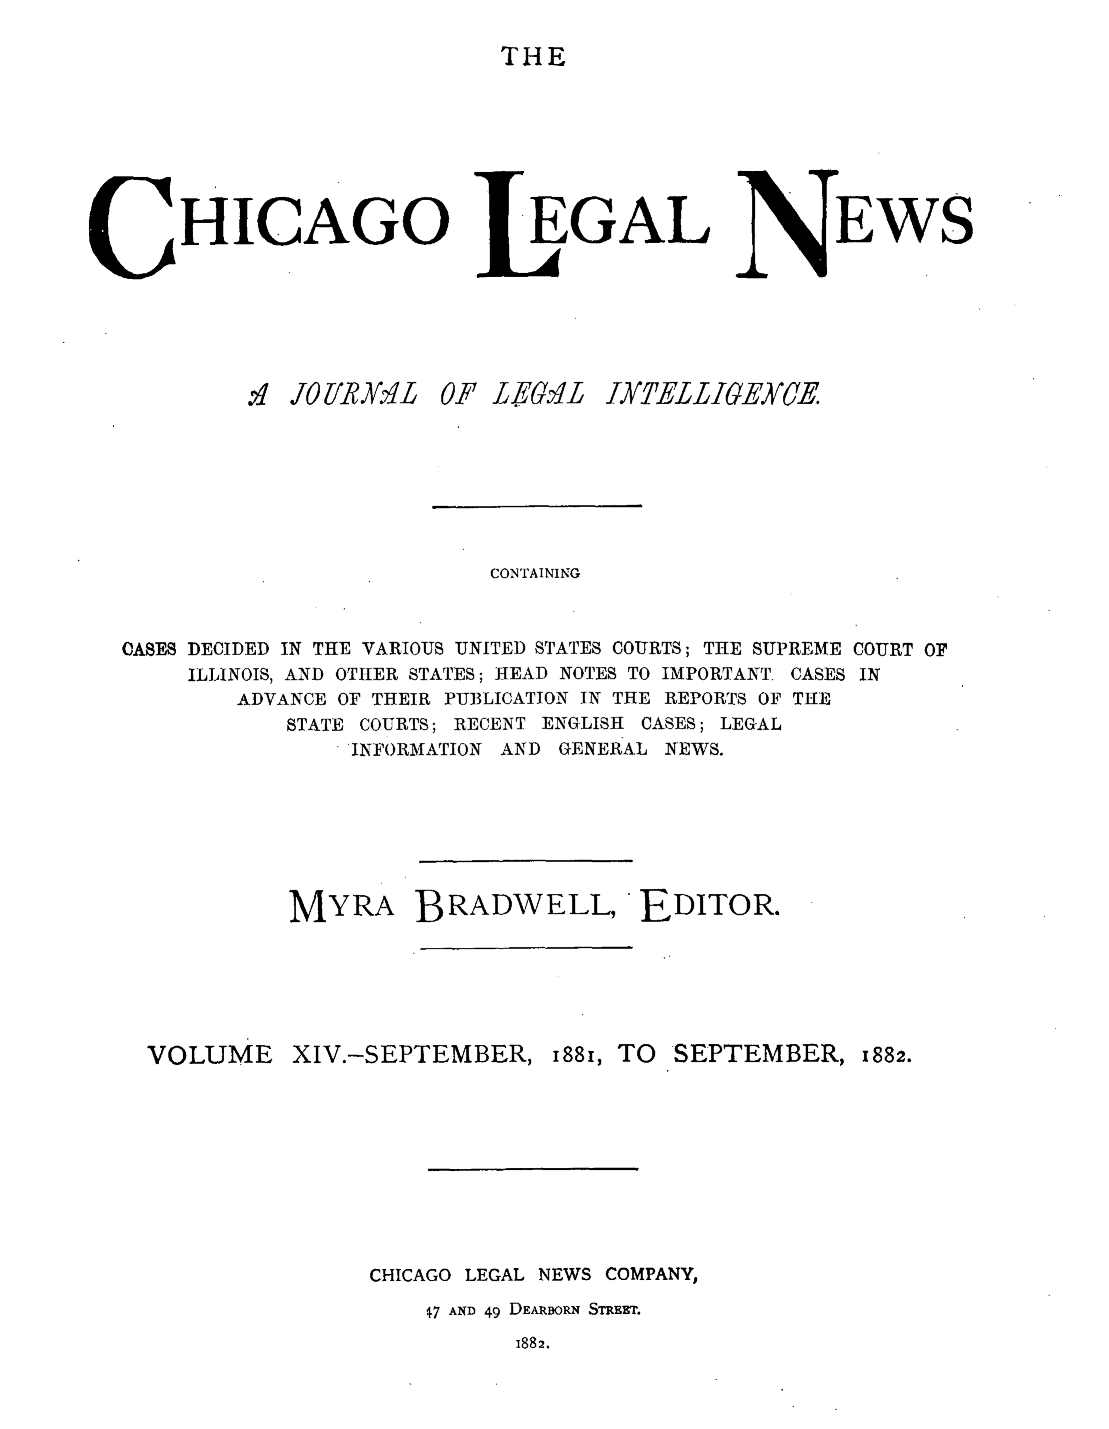 handle is hein.journals/chiclene14 and id is 1 raw text is: THEHICAGO.q .1011R&L  CEGALP LEGLEWSCONTAININGOASES DECIDED IN THE VARIOUS UNITED STATES COURTS; THE SUPREME COURT OFILLINOIS, AND OTHER STATES; HEAD NOTES TO IMPORTANT. CASES INADVANCE OF THEIR PUBLICATION IN THE REPORTS OF THESTATE COURTS; RECENT ENGLISH CASES; LEGALINFORMATION AND GENERAL NEWS.MYRA BRADWELL, EDITOR.VOLUME XIV.-SEPTEMBER, 1881, TOCHICAGO LEGAL NEWS COMPANY,7 AND 49 DEARBORN STREET.i882.INTELLIGEYCESEPTEMBER, 1882.